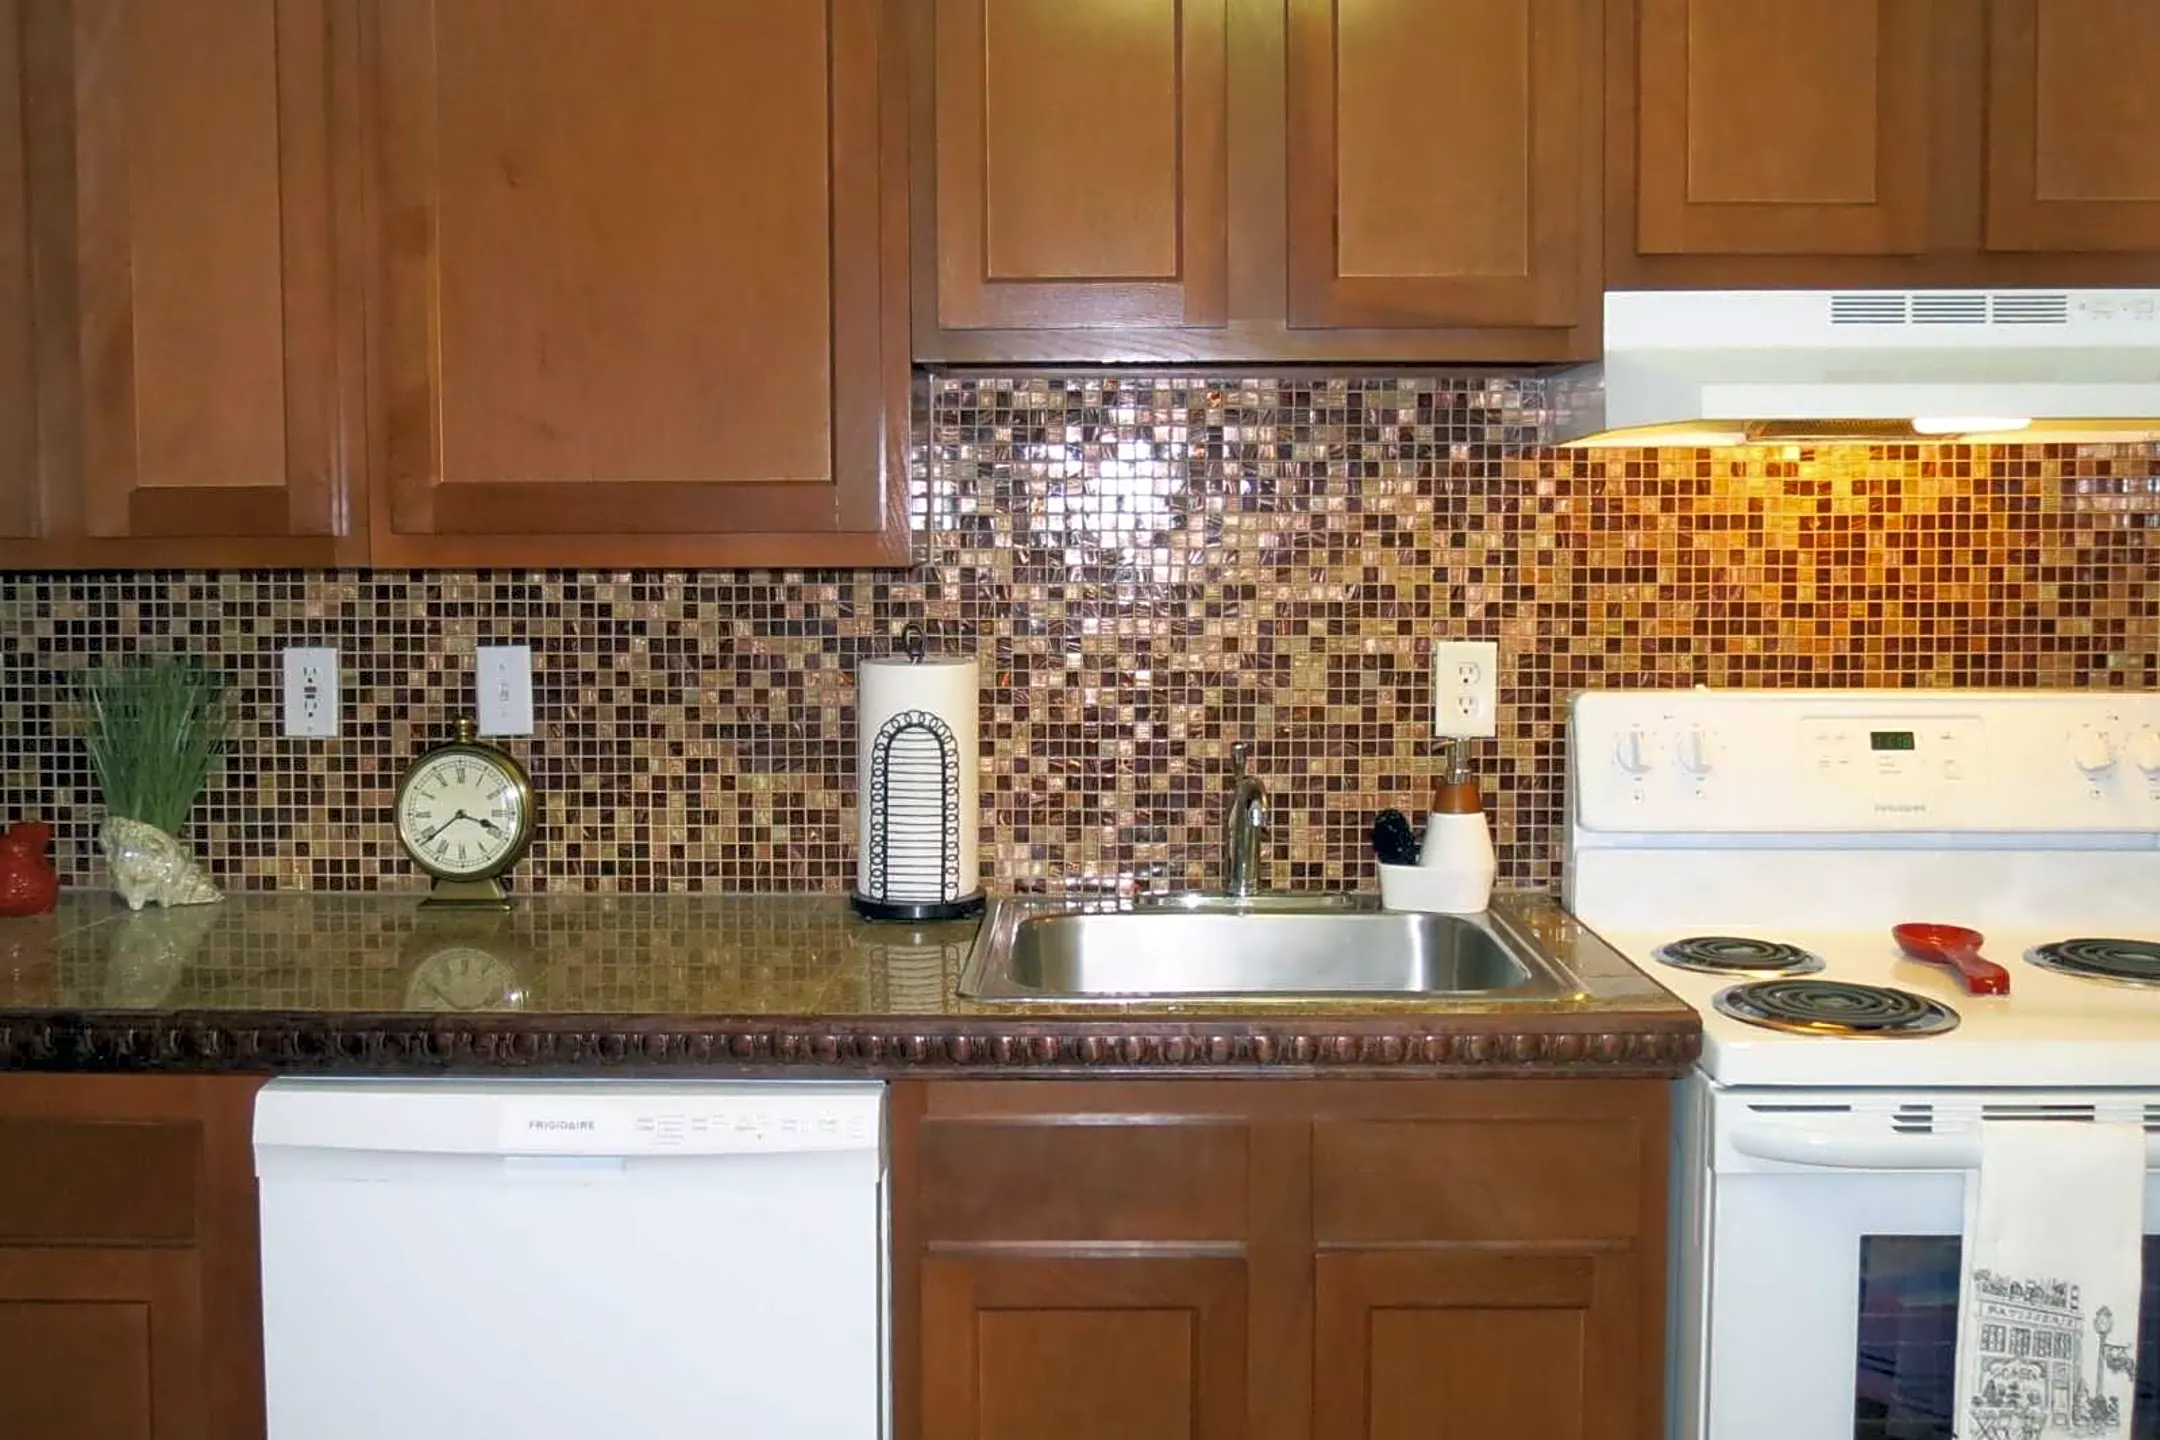 Kitchen - Carlton Park Apartments - North Olmsted, OH